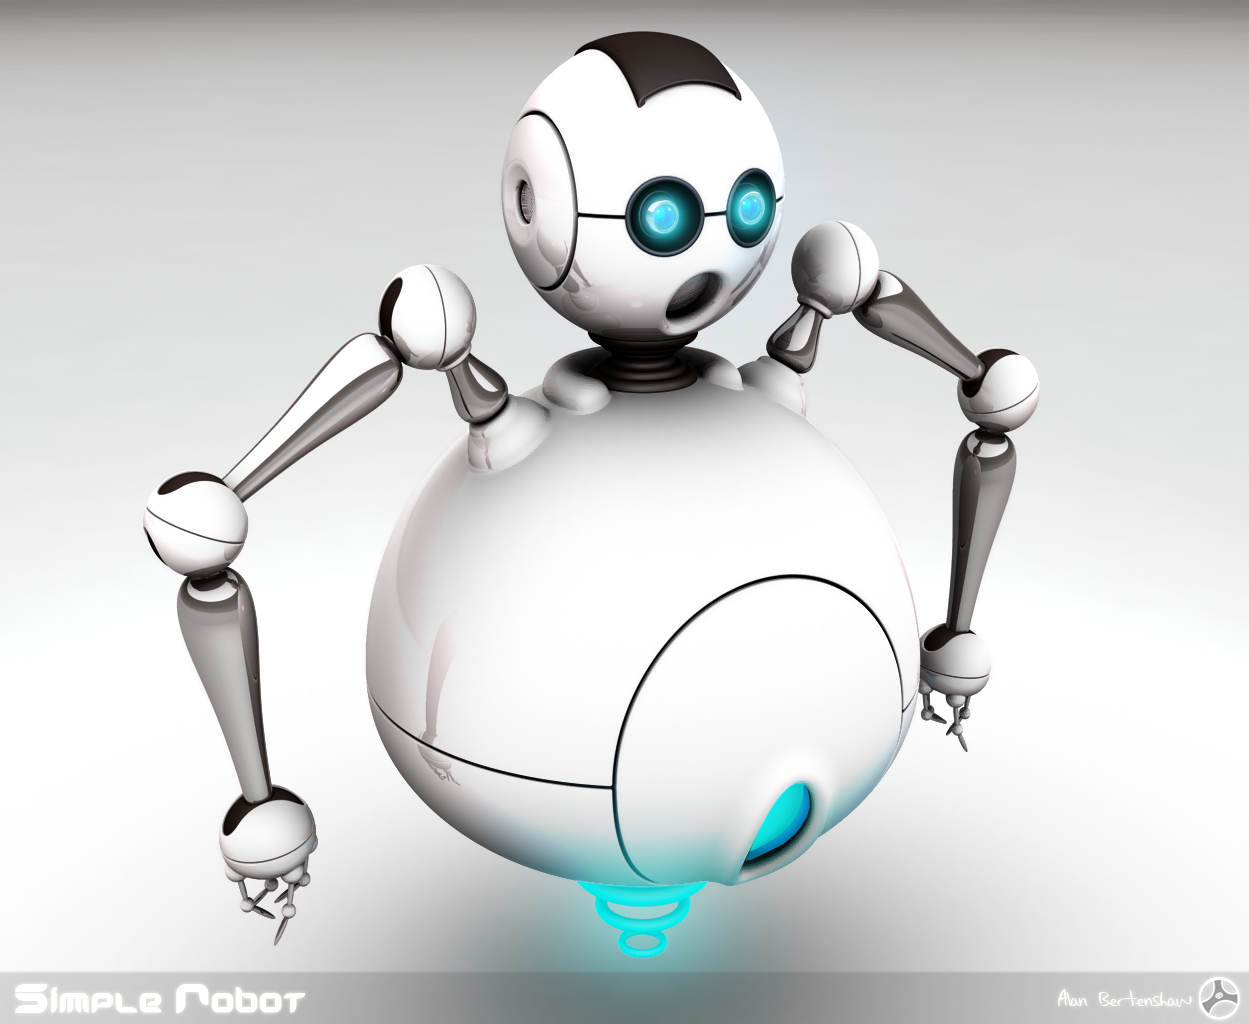 Simple Robot by AfroAfroguy on DeviantArt